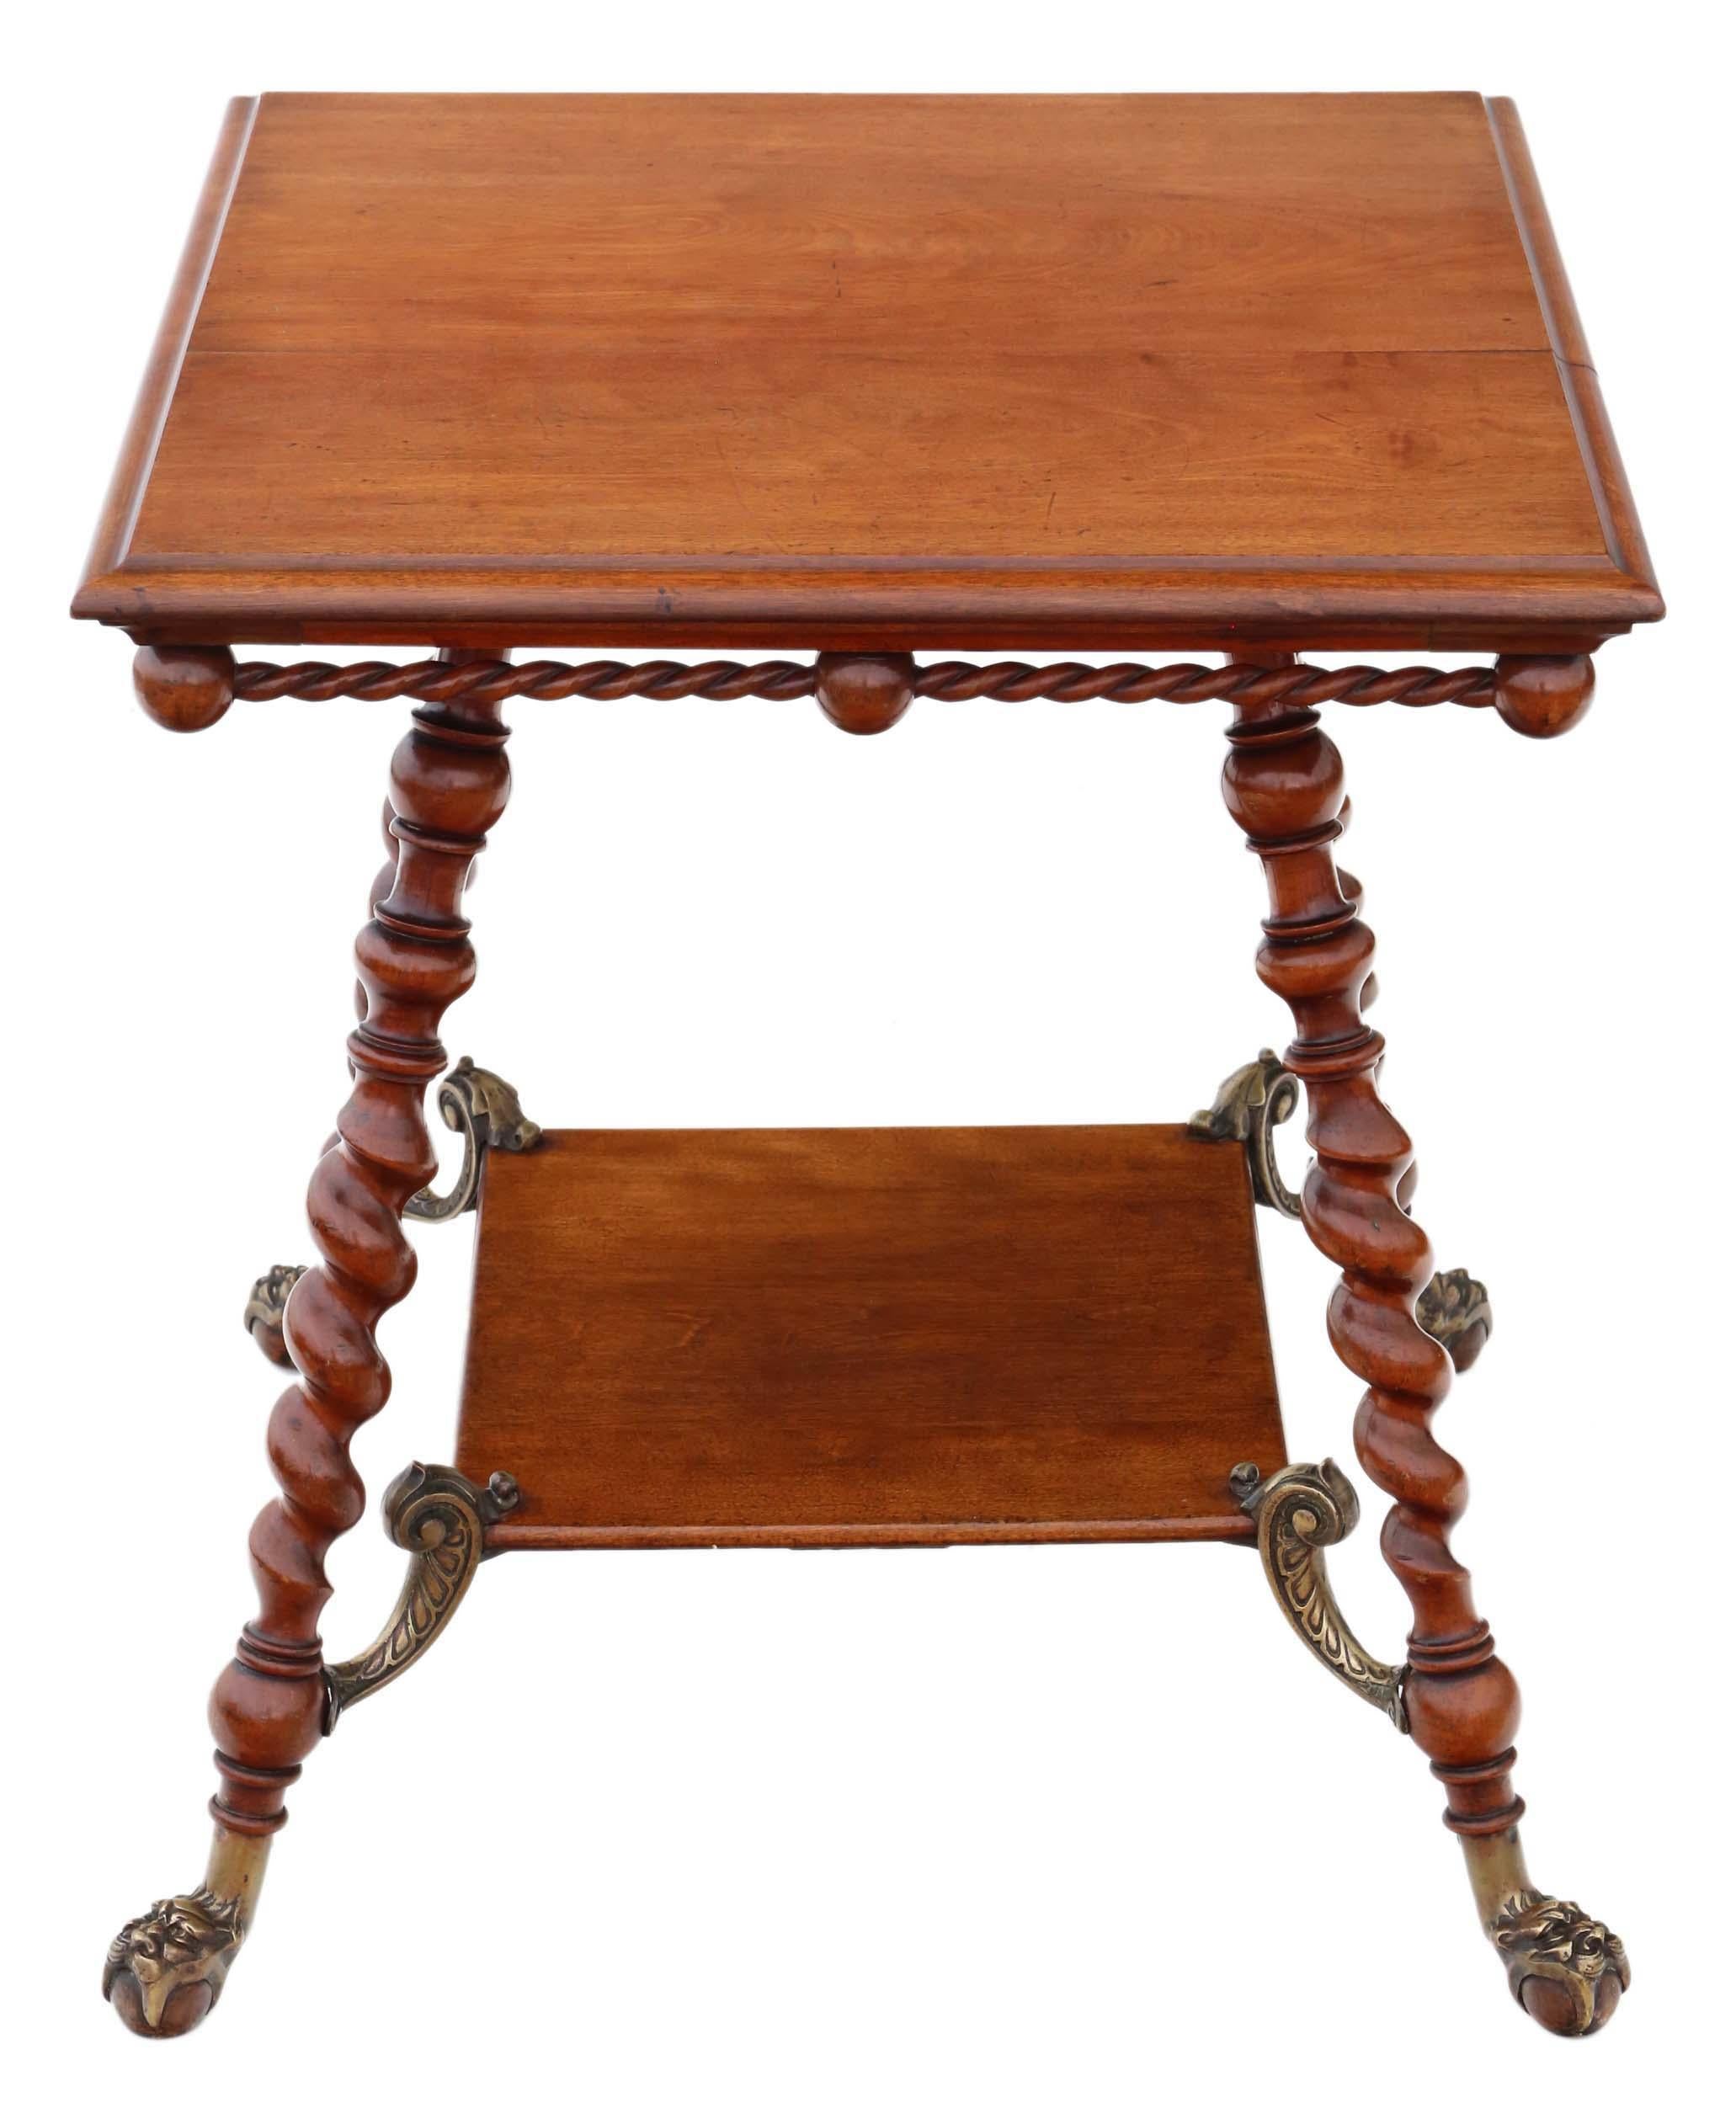 Antique and exceptionally rare Victorian center table dating from around 1880-1900, finely crafted from red walnut and adorned with brass accents.

This table is both solid and weighty, exhibiting no loose joints. It features attractive twist legs